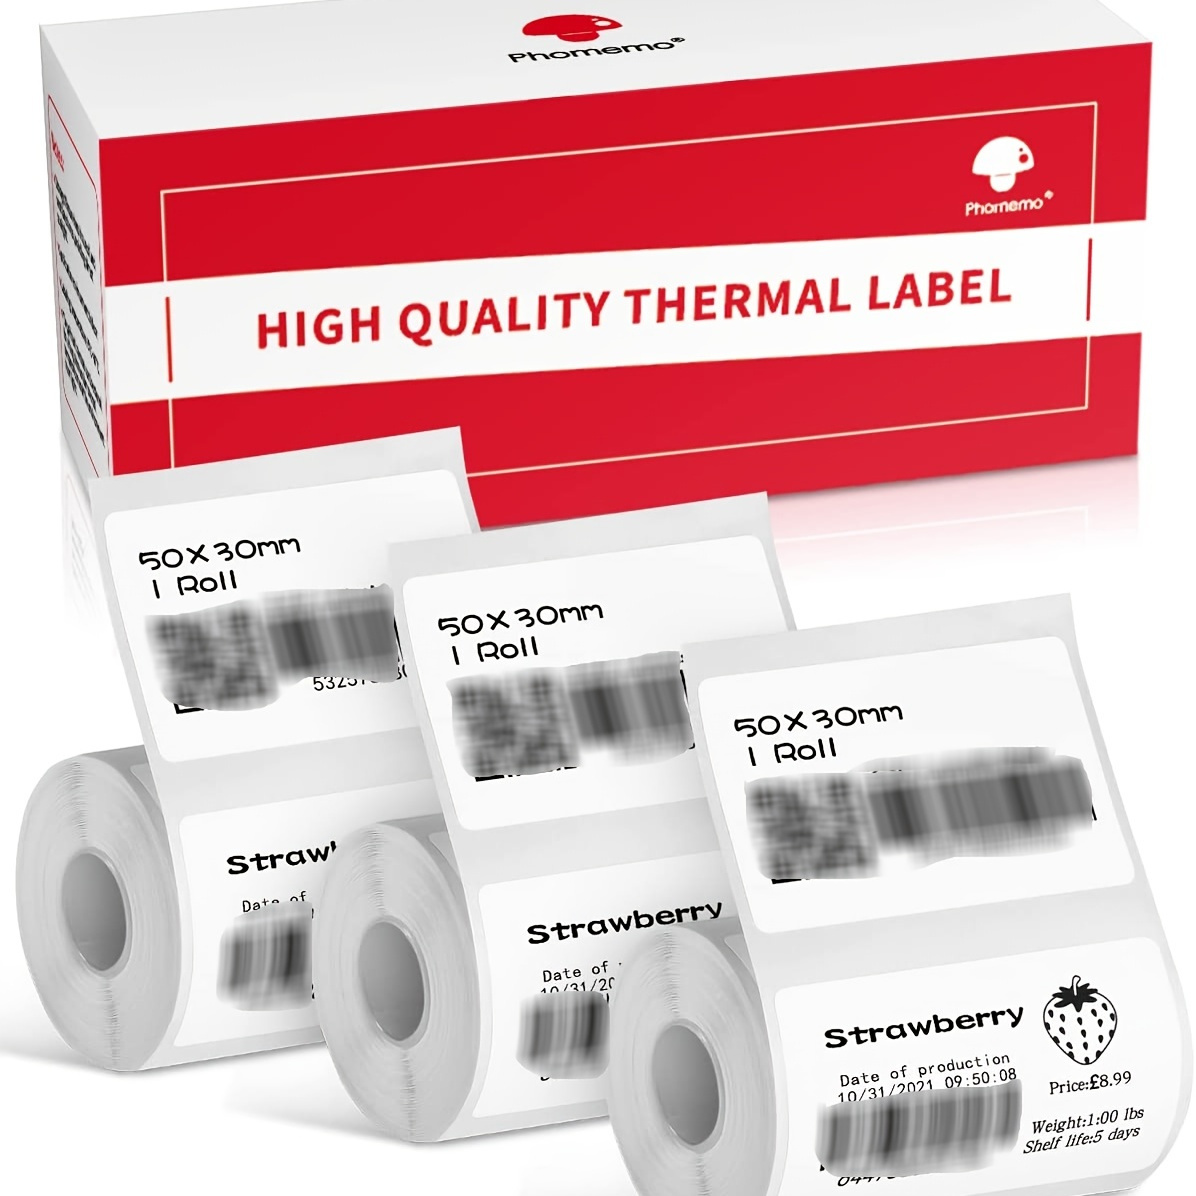 

Phomemo Thermal Labels, Multi-purpose White Self-adhesive Label Paper For Phomemo M220 M110 M120 M200 M200/m220 Label Maker, Suitable For Address, Shipping, Small Business And More, 3 Rolls